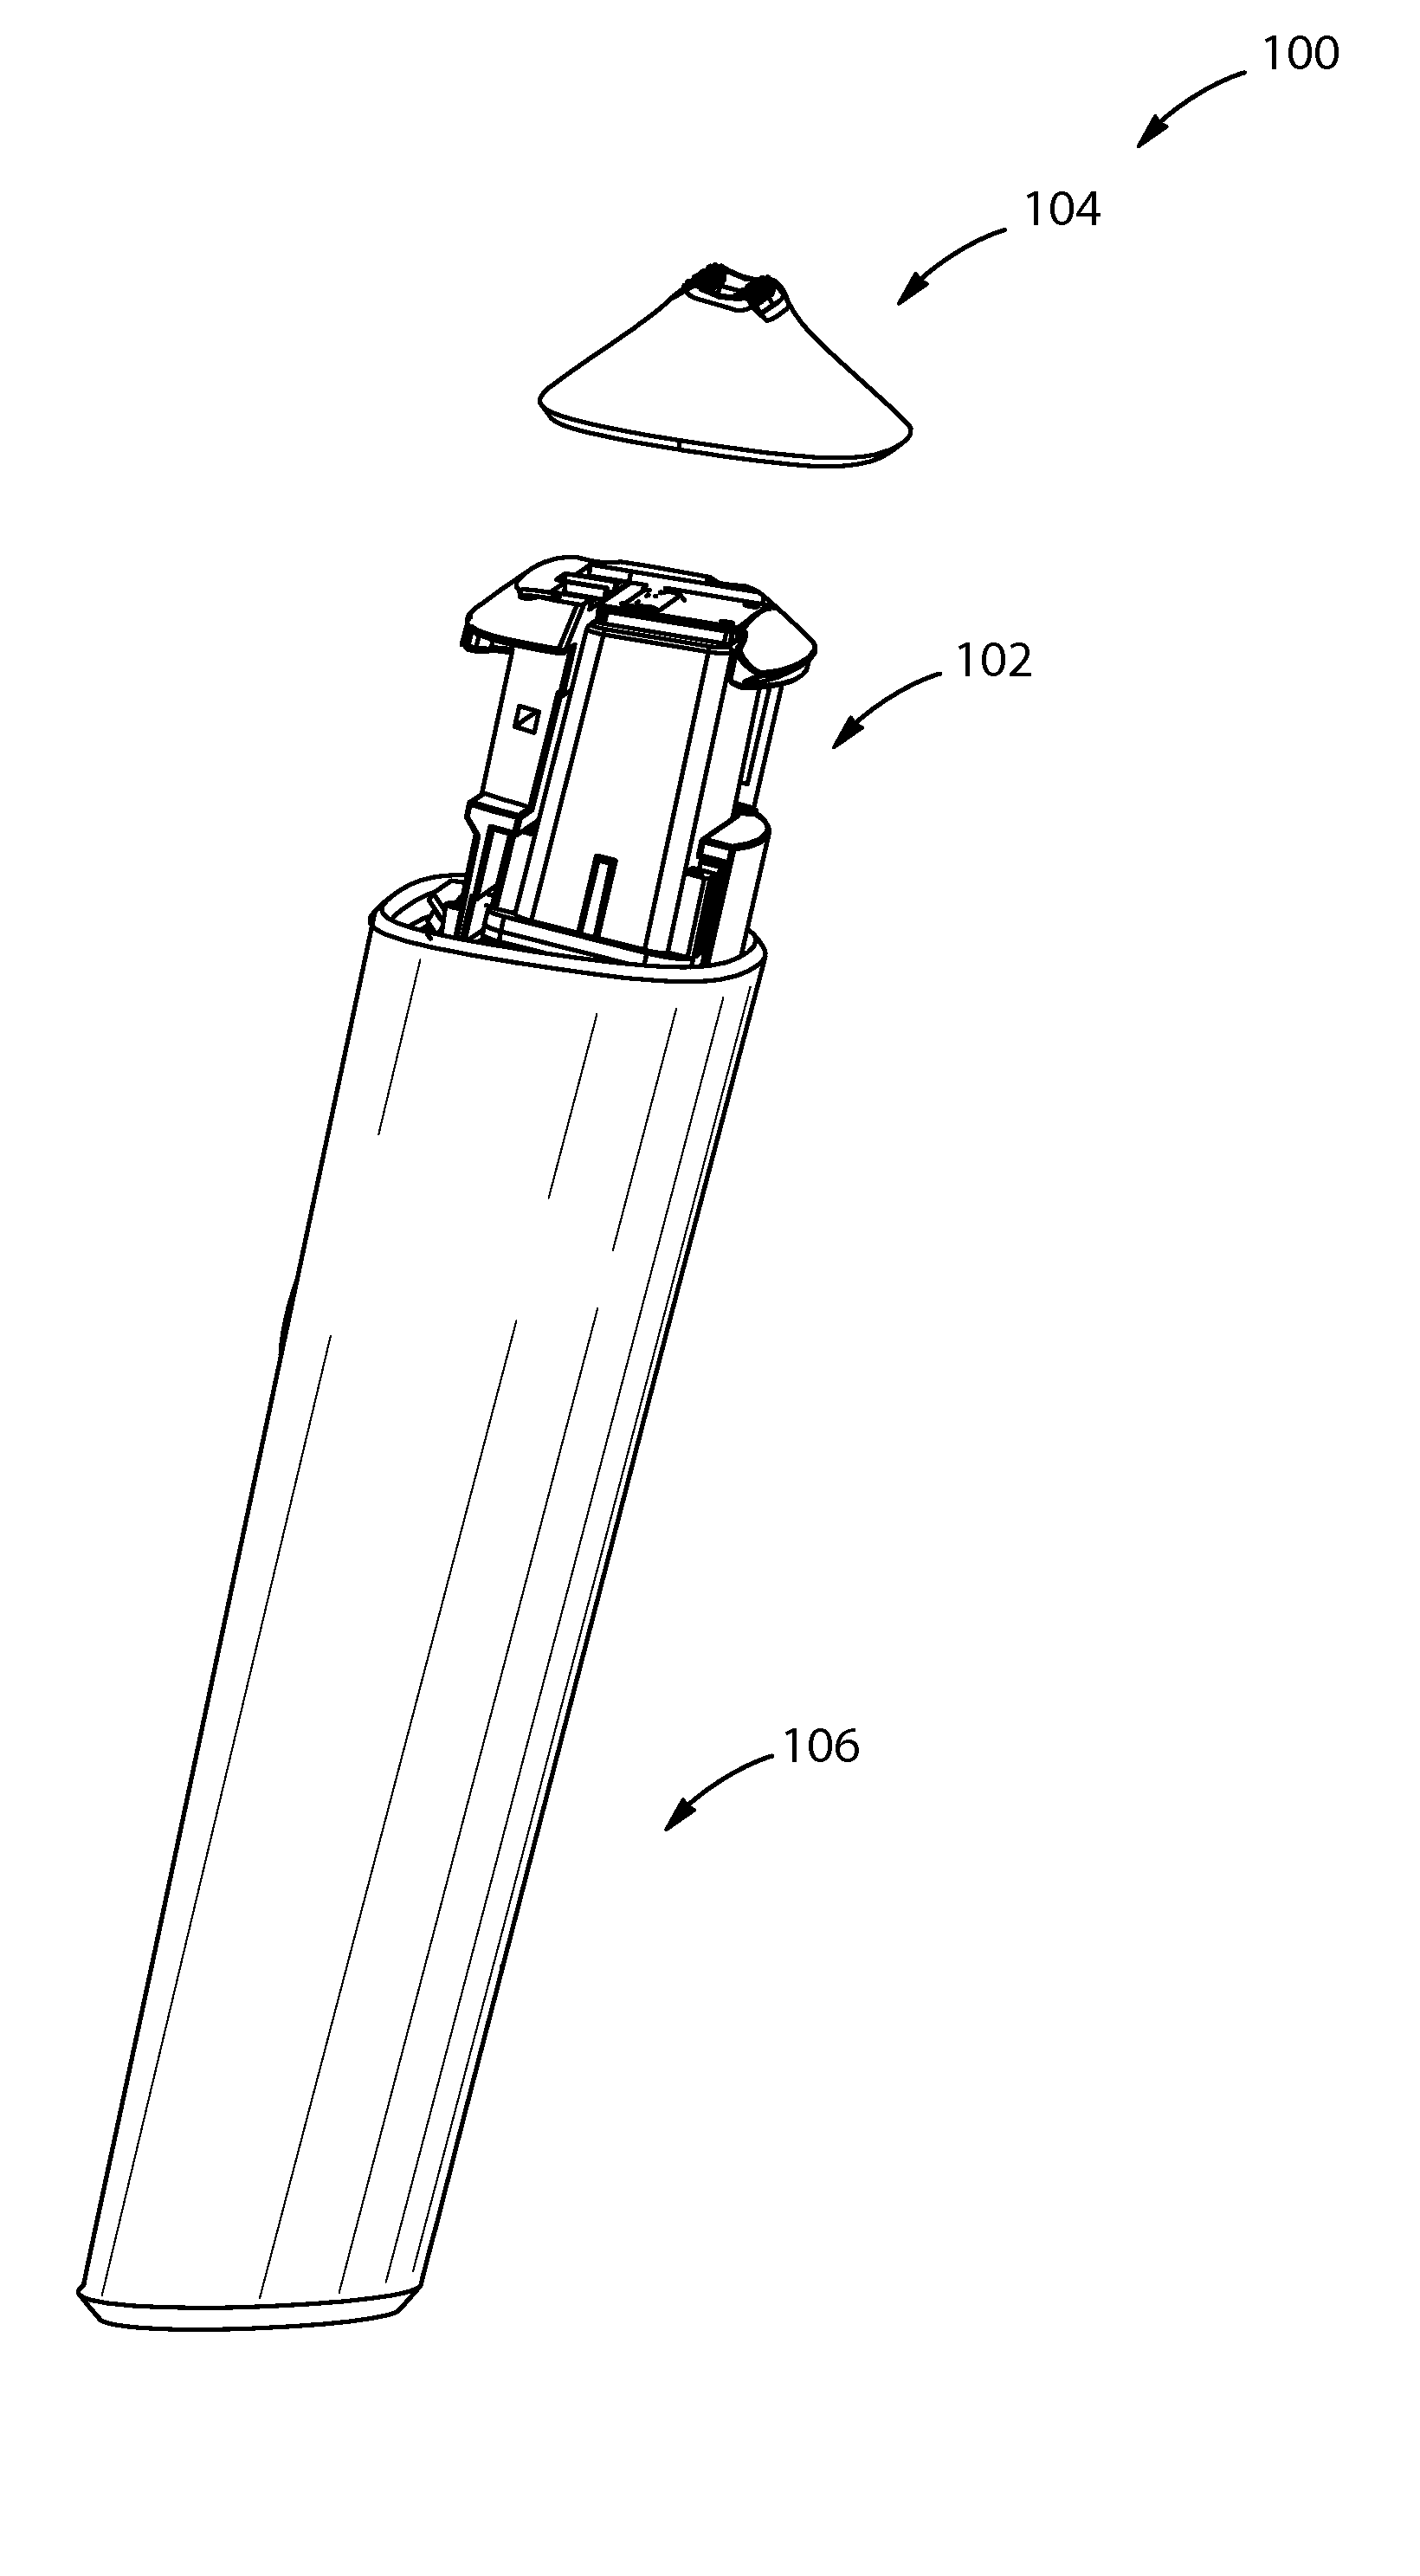 Angled cartridge assembly for a dispensing device